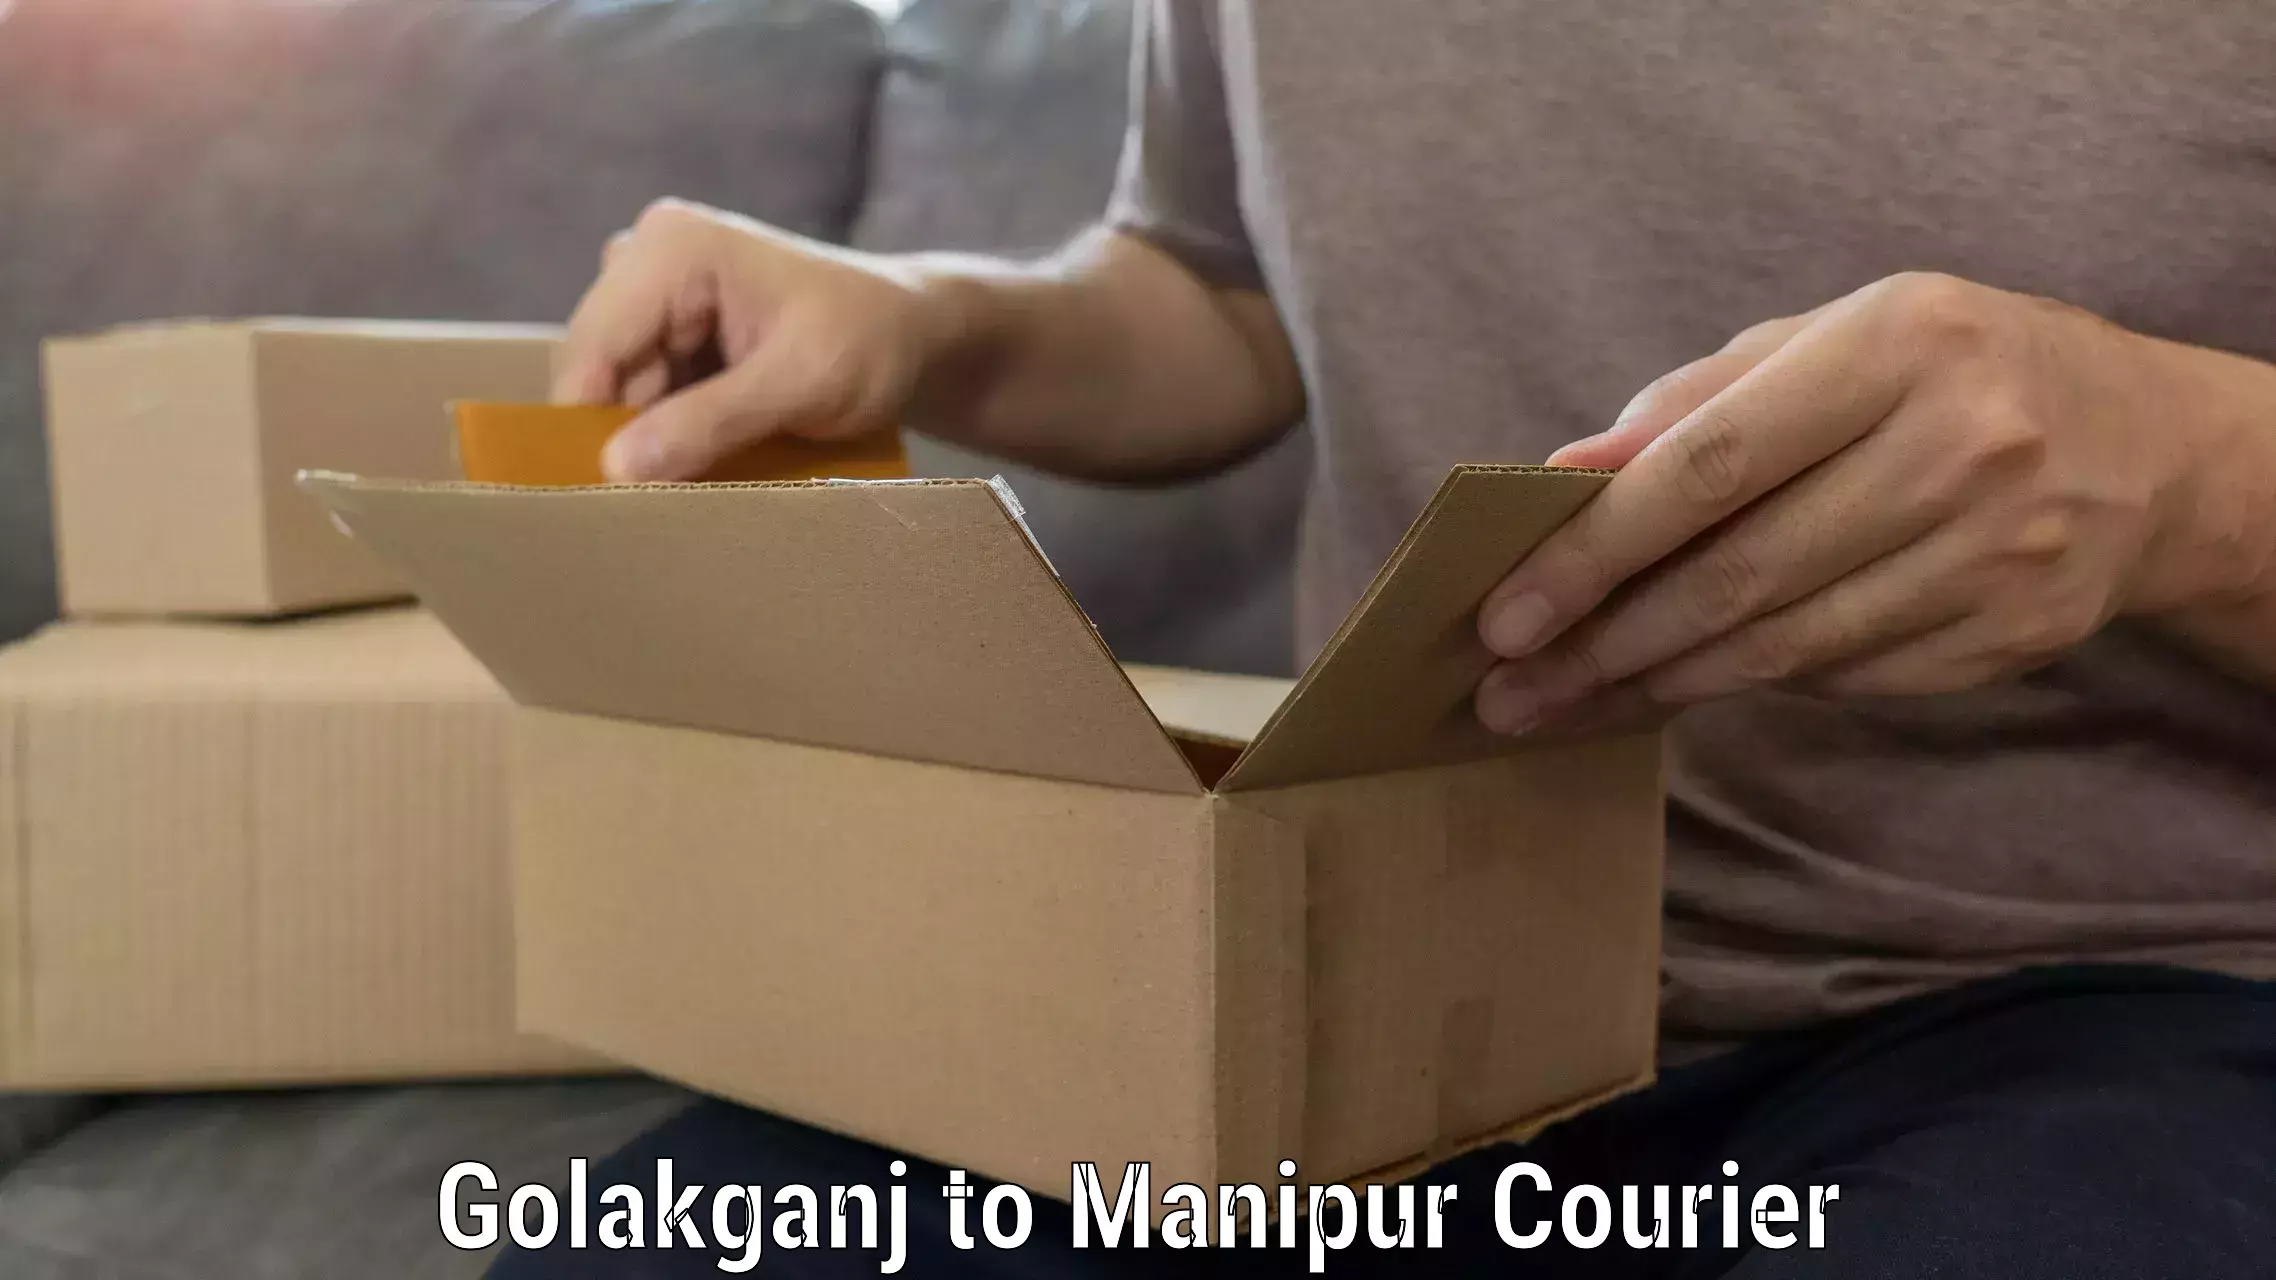 Professional relocation services Golakganj to Manipur